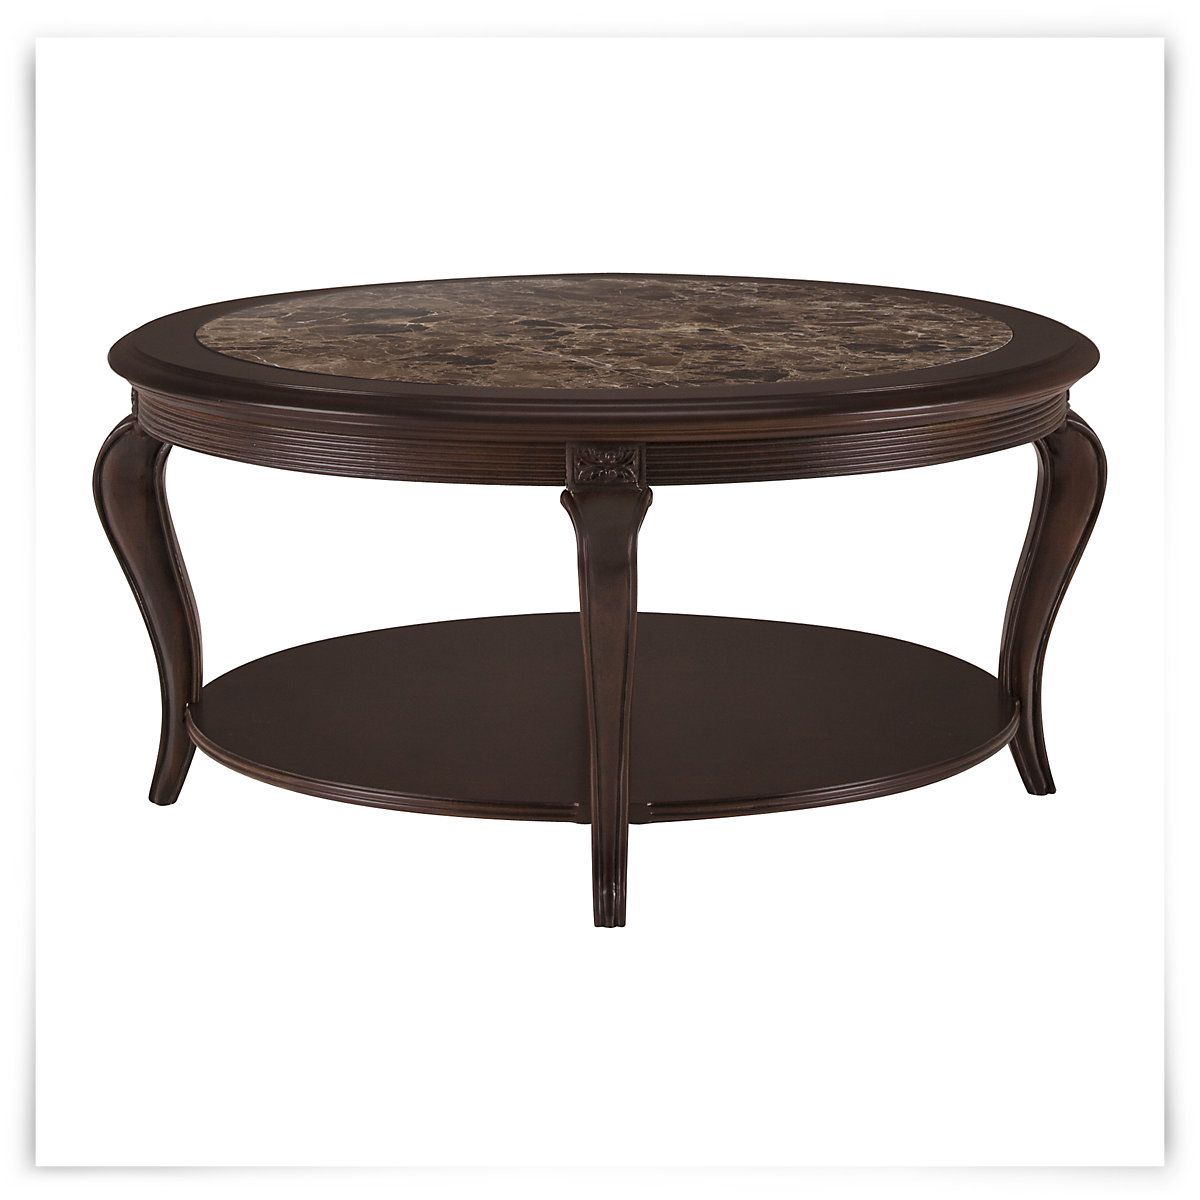 Belmont Dark Tone Marble Round Coffee Table Round Dark Wood Coffee Table Large Dark Wood Coffee Tables (View 1 of 10)